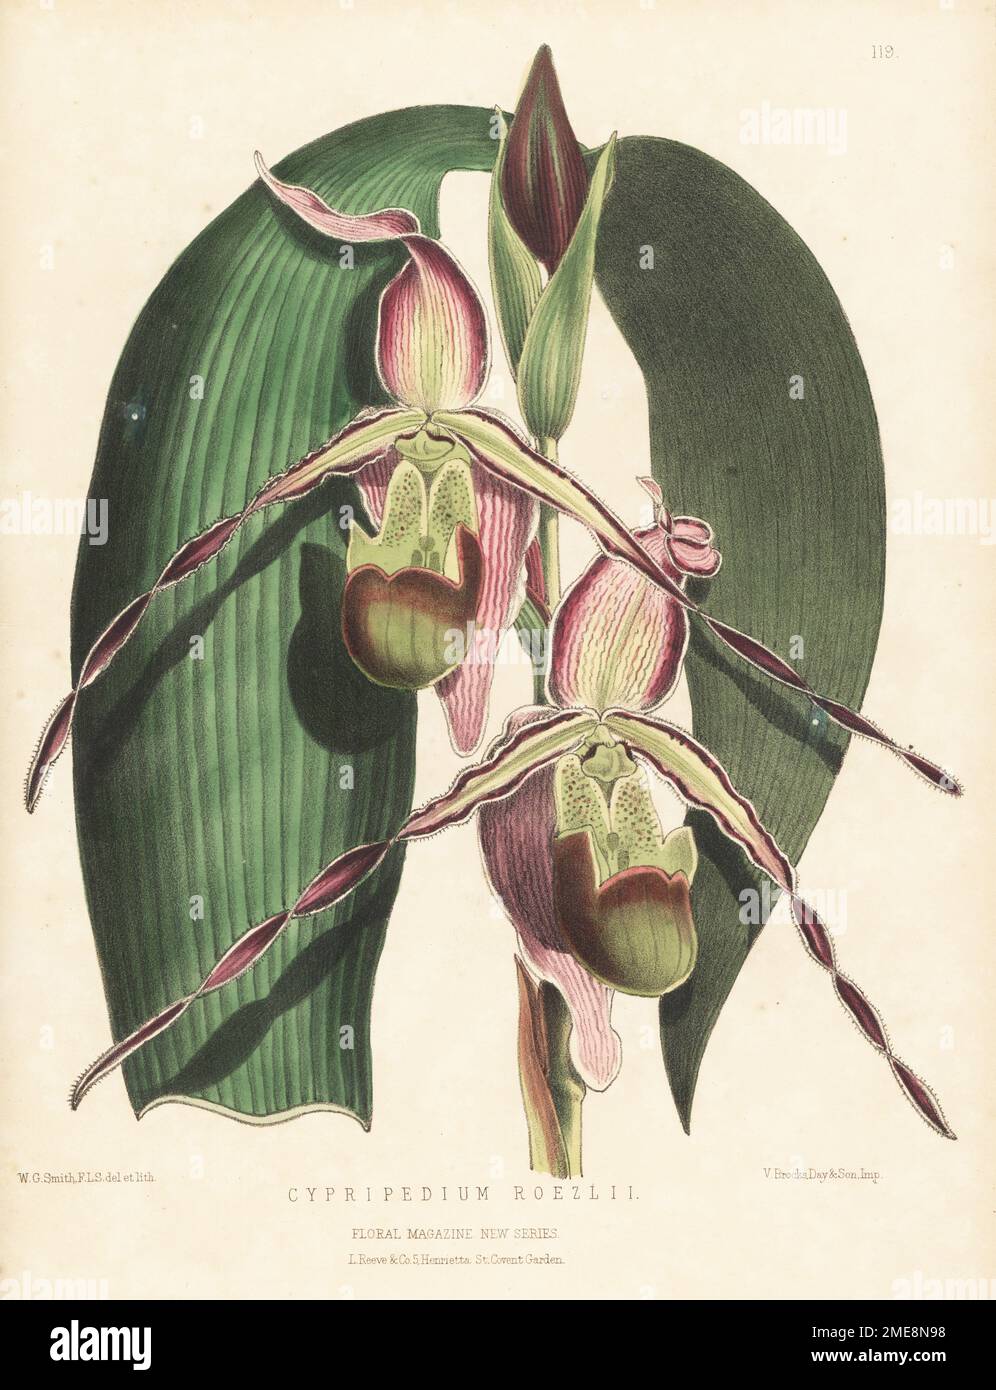 Phragmipedium longifolium var. longifolium, orchid native to Costa Rica and Ecuador. Discovered by Benedikt Roezl on the banks of the river Dagua, Columbia. Raised by Messrs. Veitch and Son nursery, Chelsea. As Cypripedium roezlii. Handcolored botanical illustration drawn and lithographed by Worthington George Smith from Henry Honywood Dombrain's Floral Magazine, New Series, Volume 3, L. Reeve, London, 1874. Lithograph printed by Vincent Brooks, Day & Son. Stock Photo